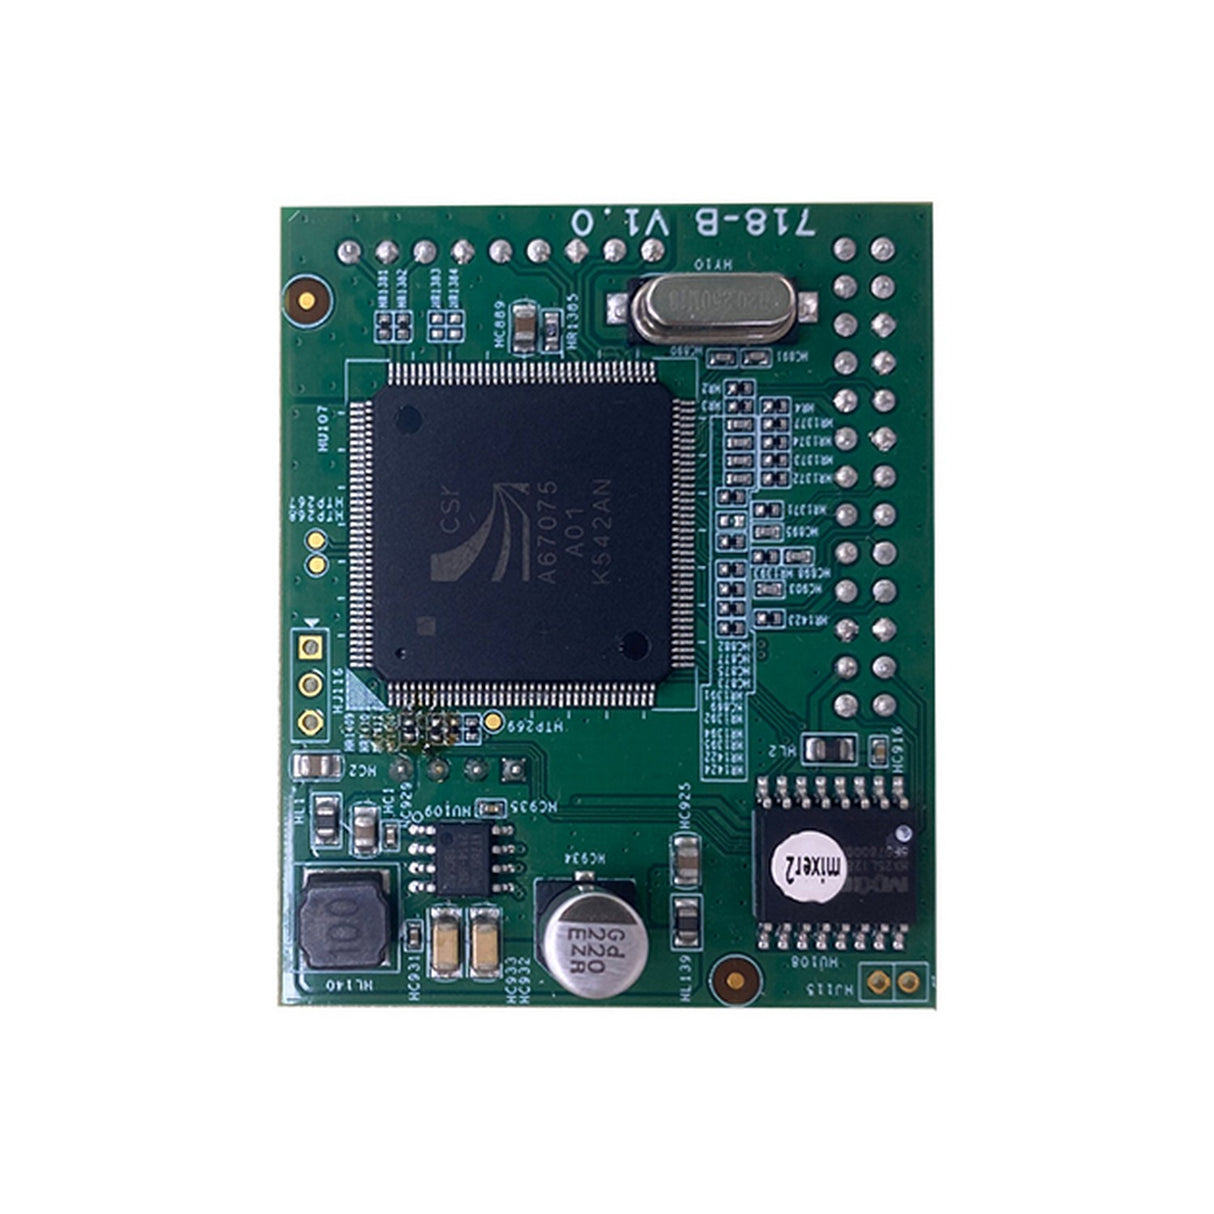 Just Add Power DSP-KIT Dolby Digital 5.1 Add-On Chip for 718KVM